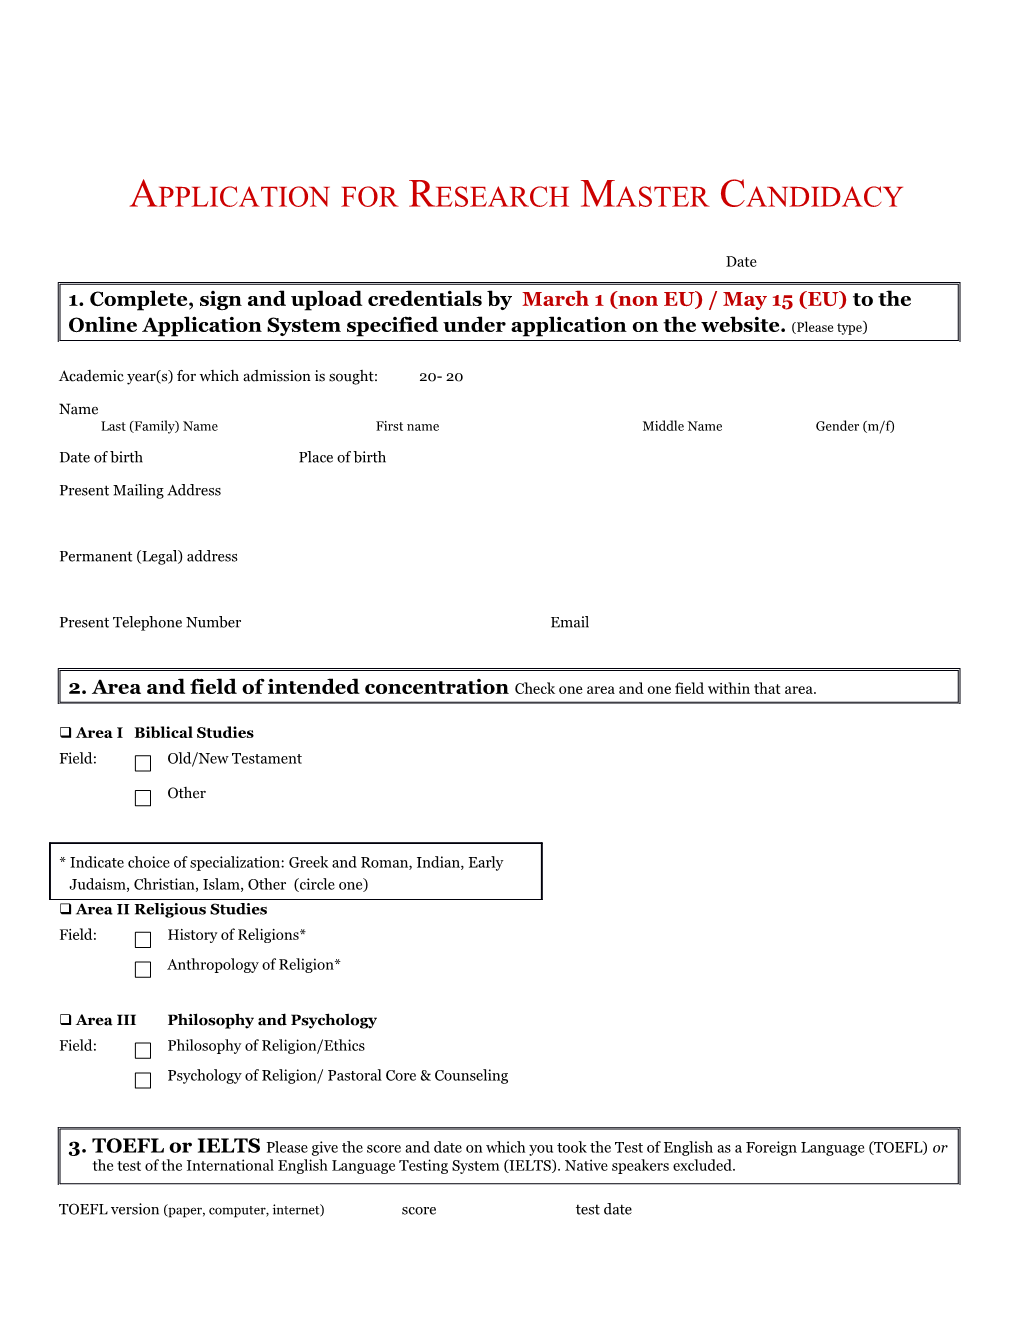 Application Form for Phd Programme